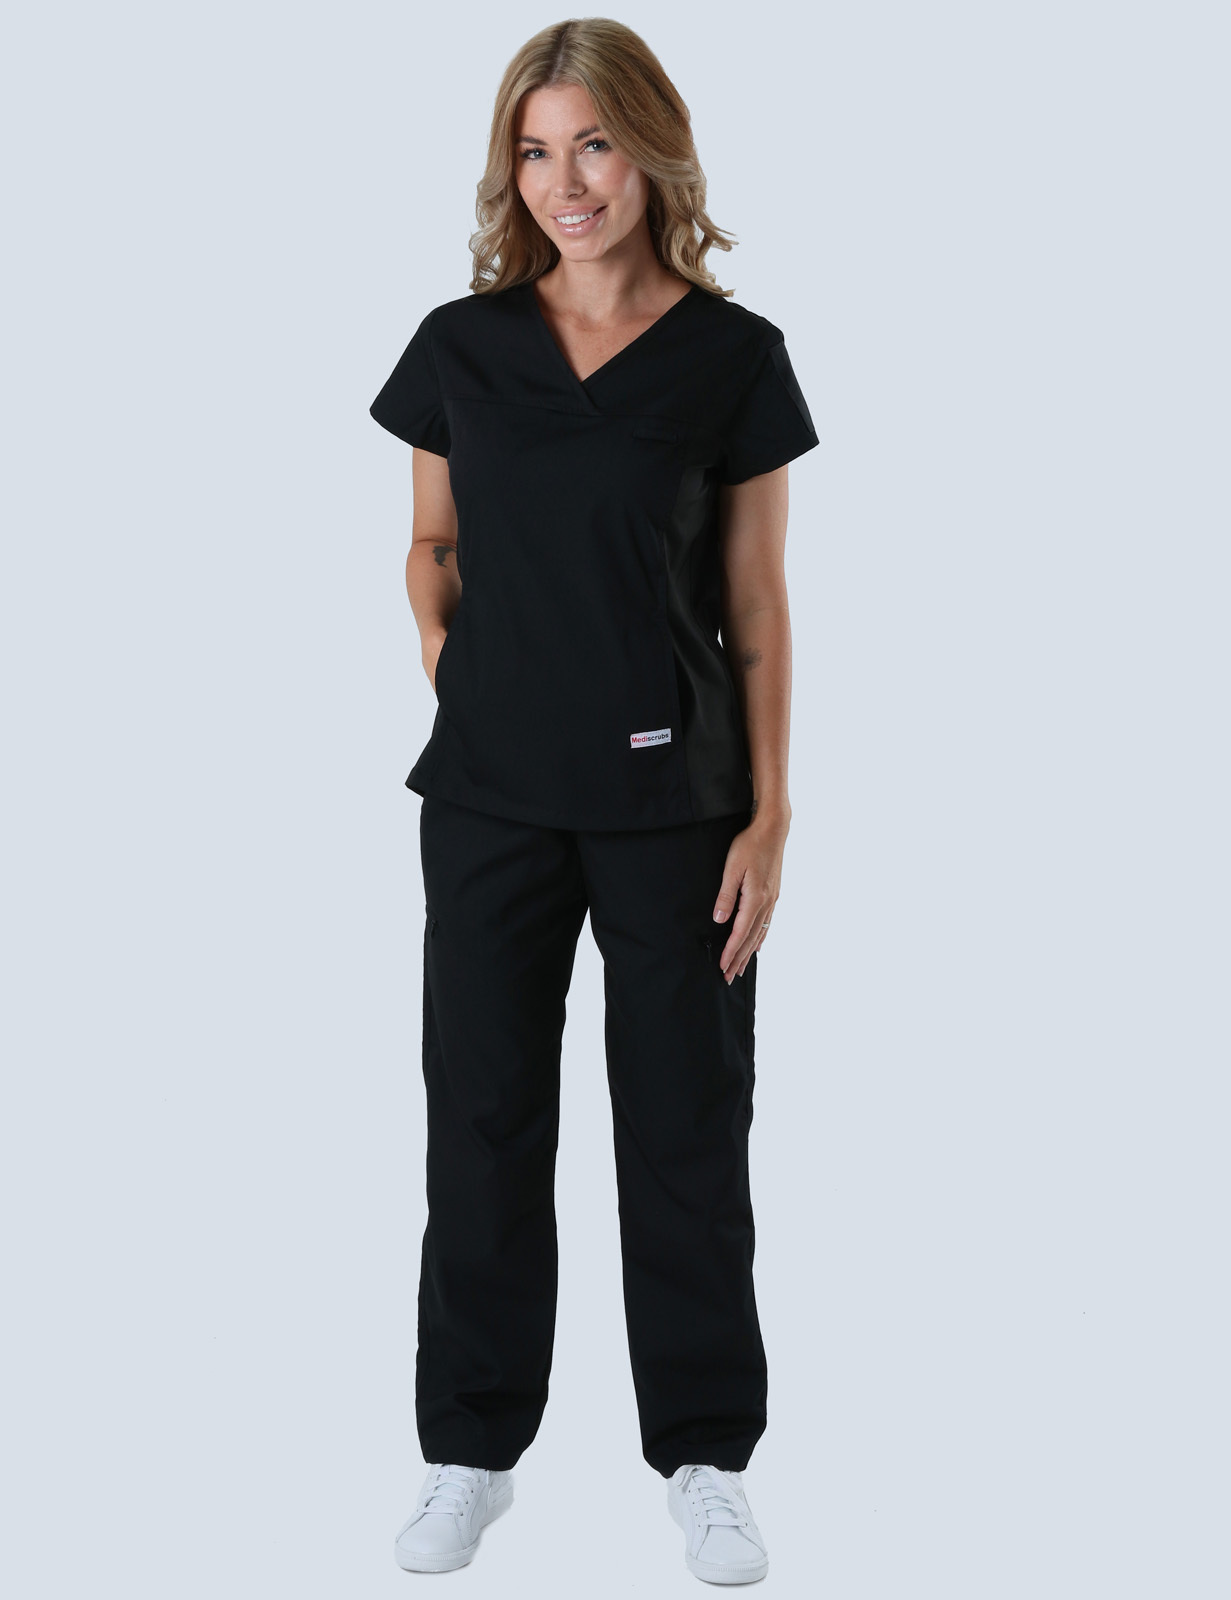 Women's Fit Solid Scrub Top With Spandex Panel - Black - 3X Large